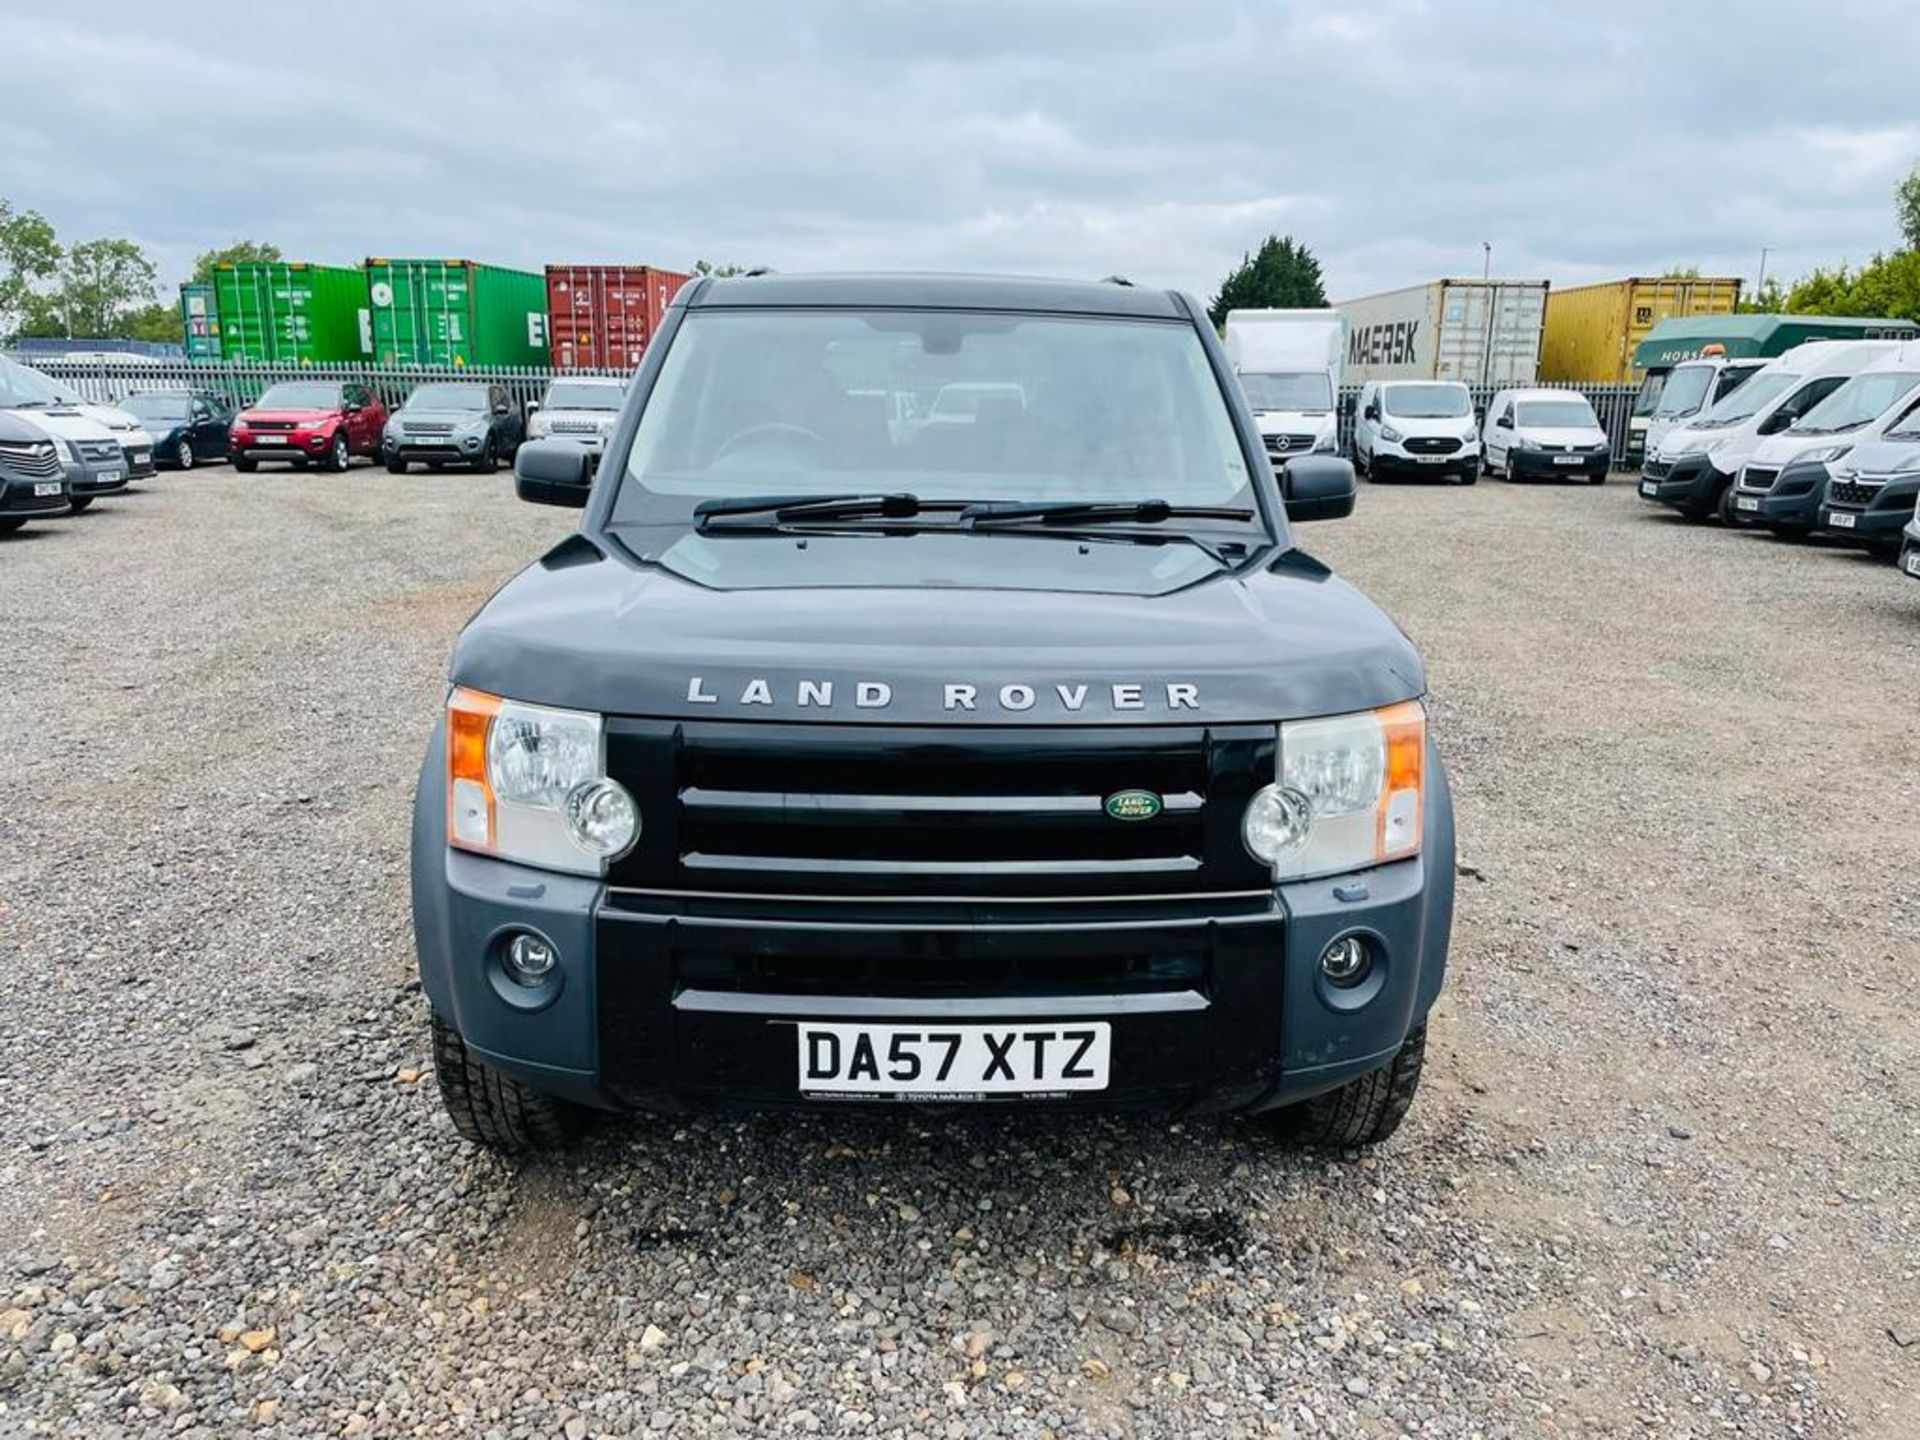 ** ON SALE ** Land Rover Discovery 3 2.7 TDV6 XS Commercial 2008 '57 Reg' A/C - All Terrain Settings - Image 2 of 29